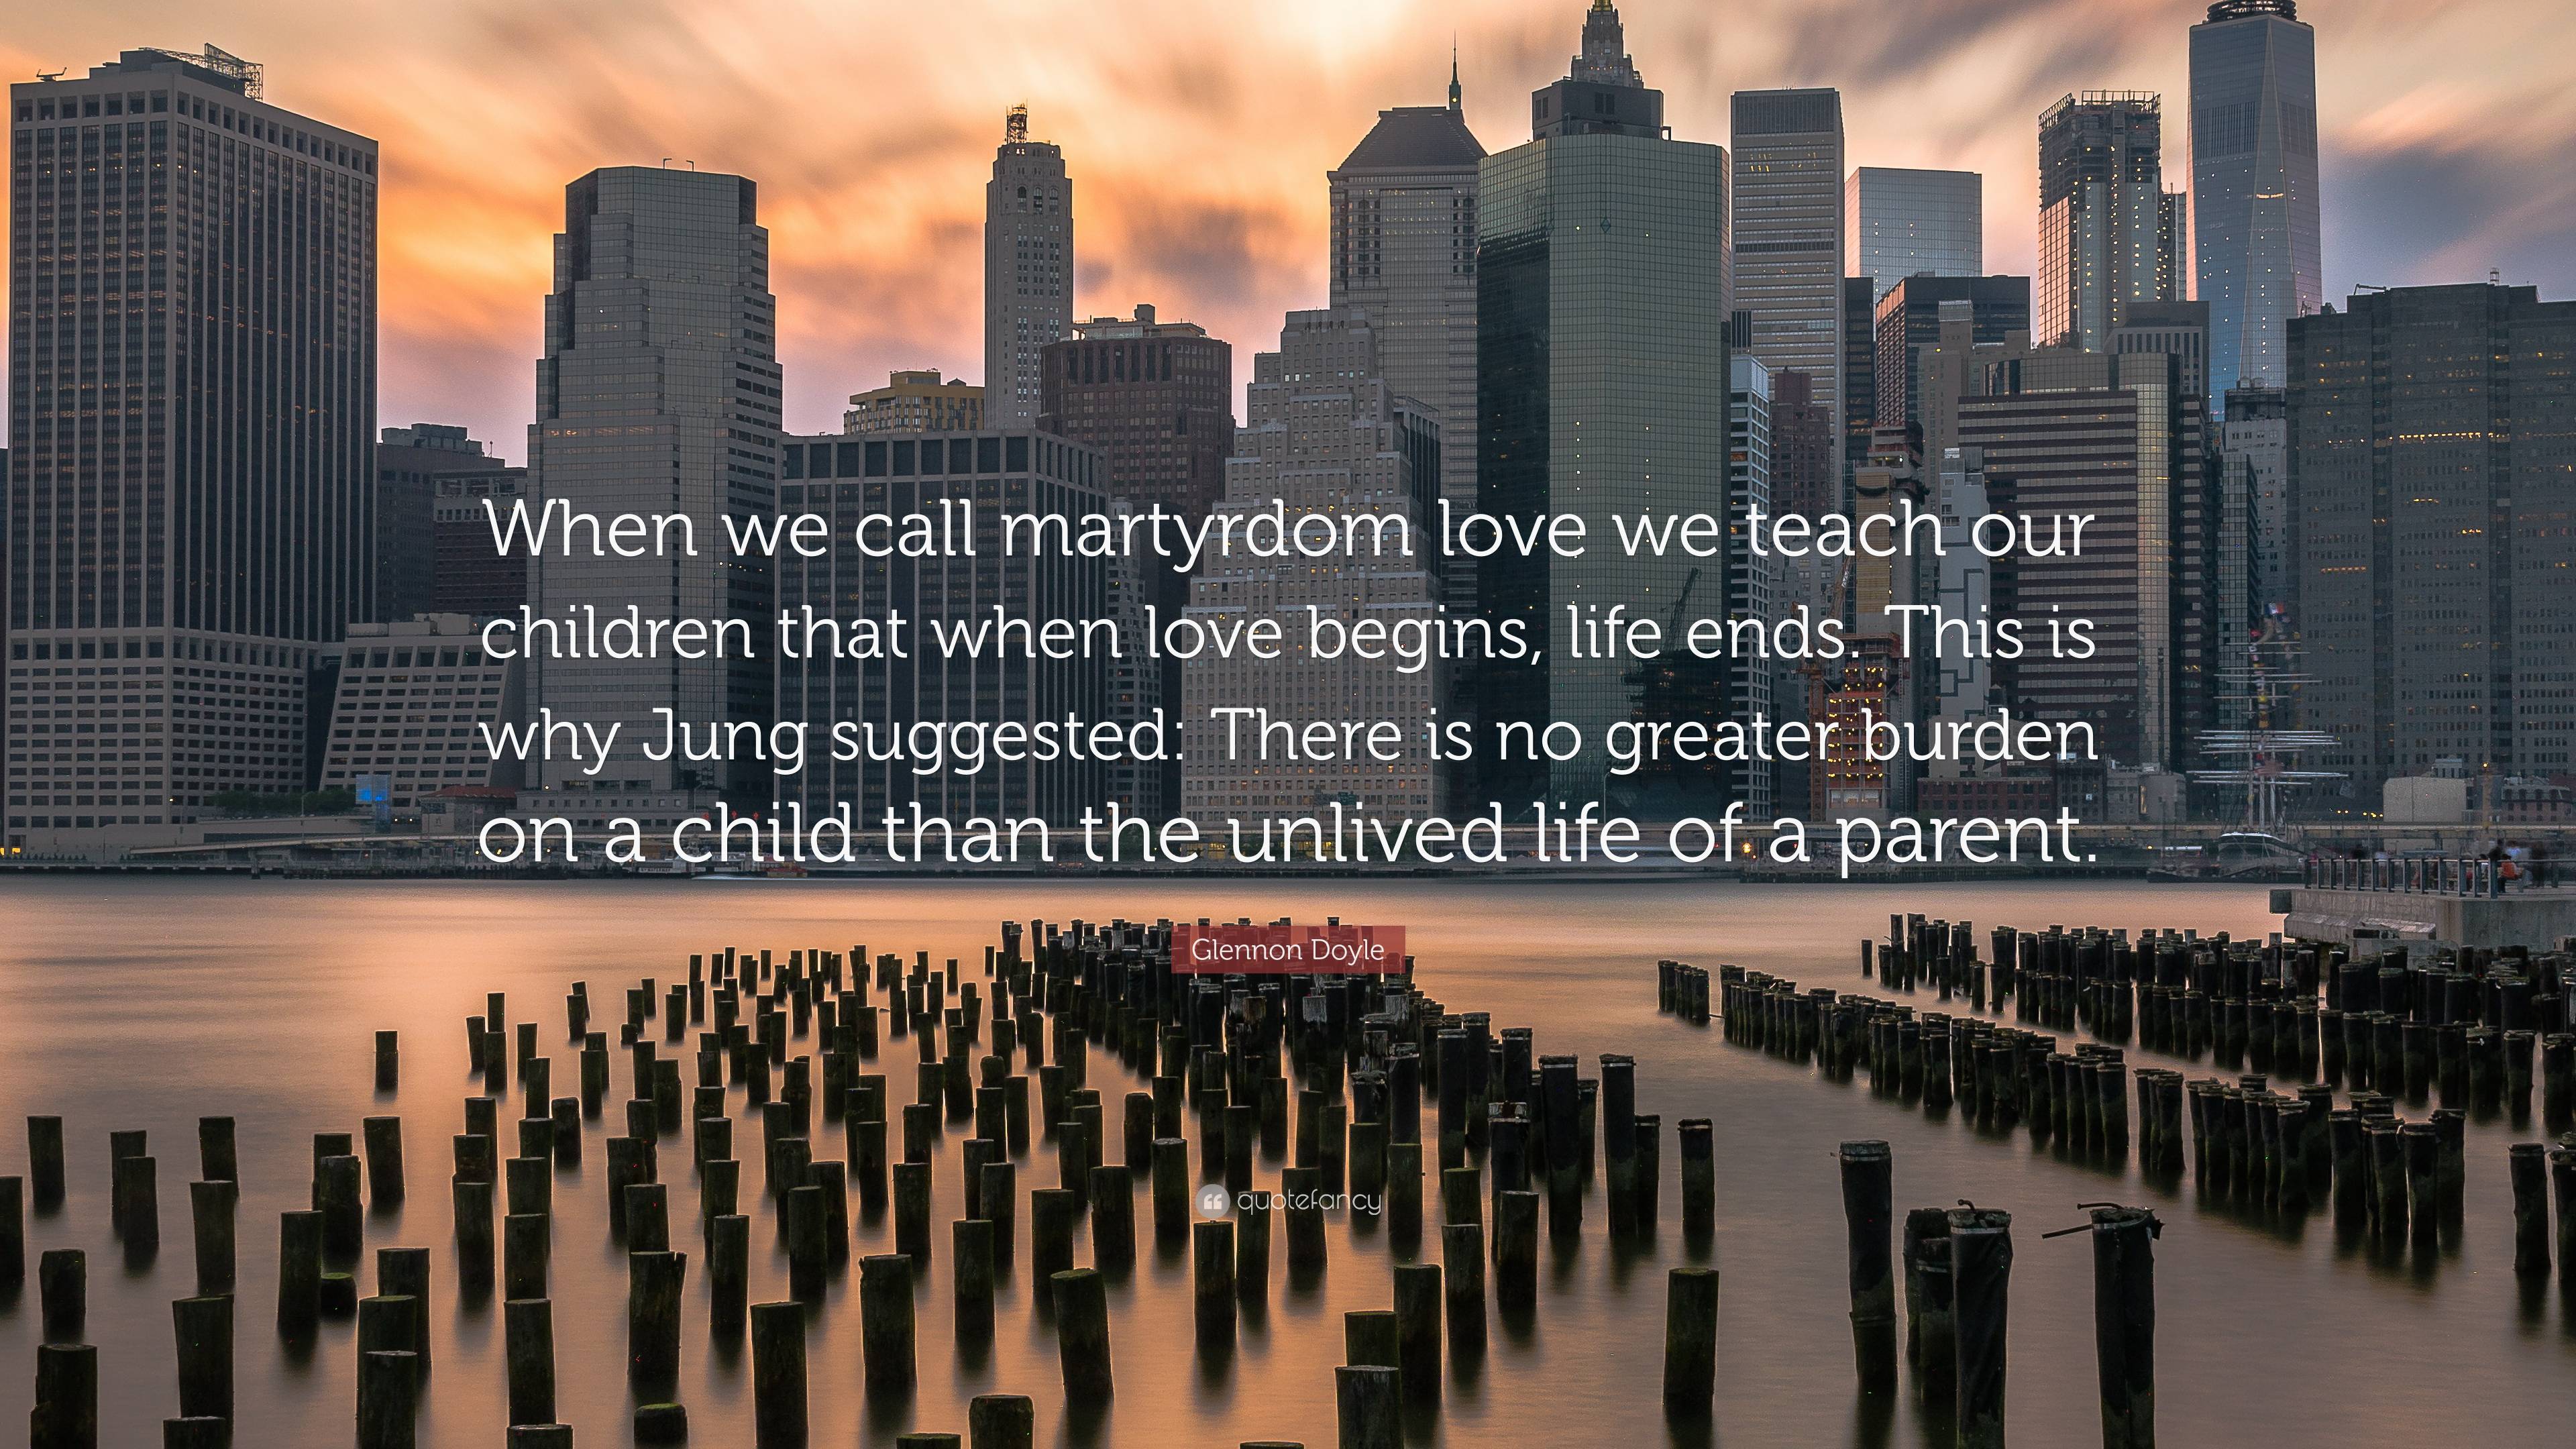 Glennon Doyle Quote: “When we call martyrdom love we teach our